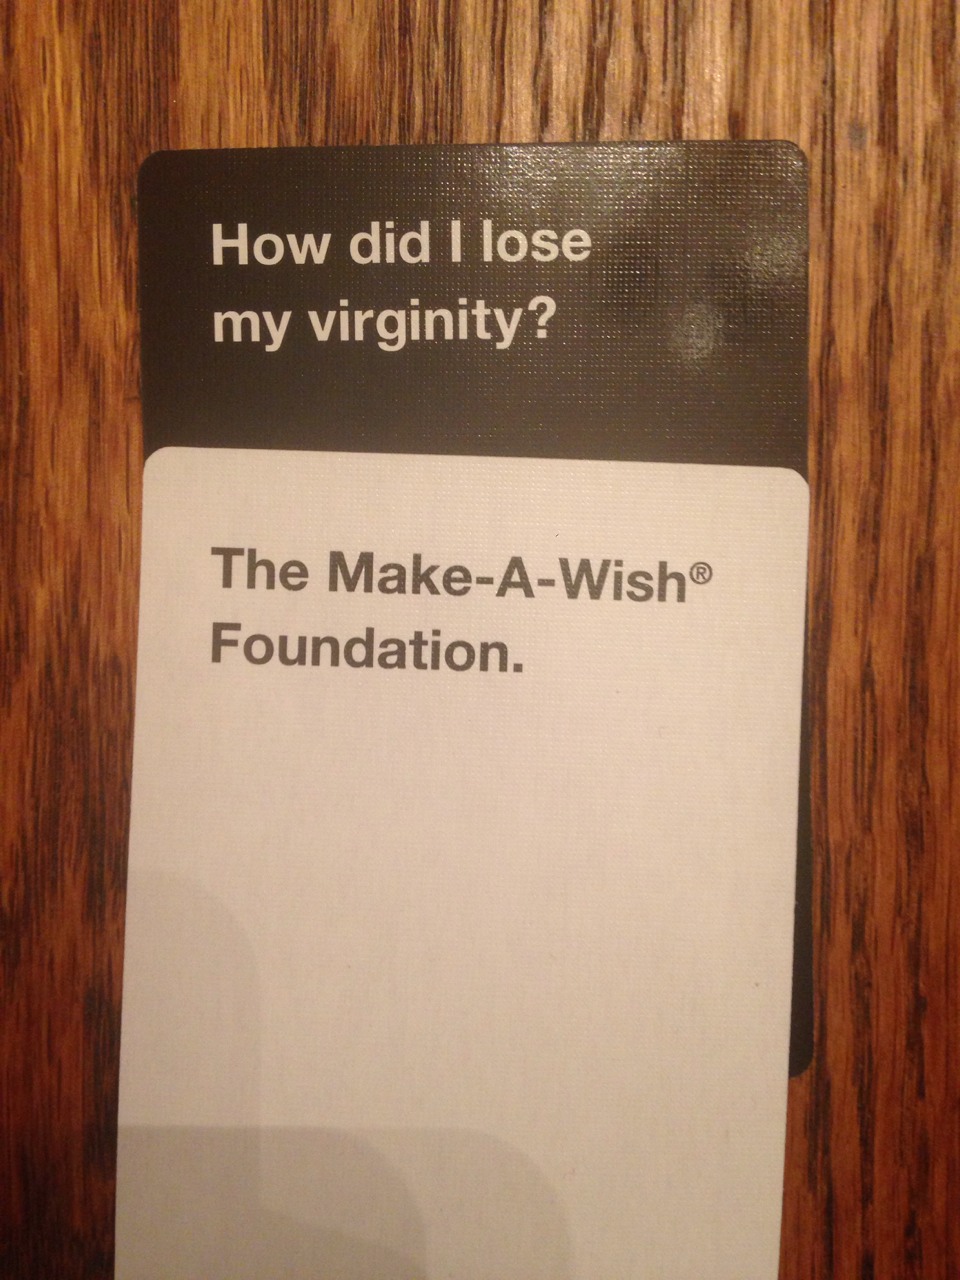 monday morning randomness -  cards against humanity how did i lose my virginity - How did I lose my virginity? The MakeAWish Foundation.